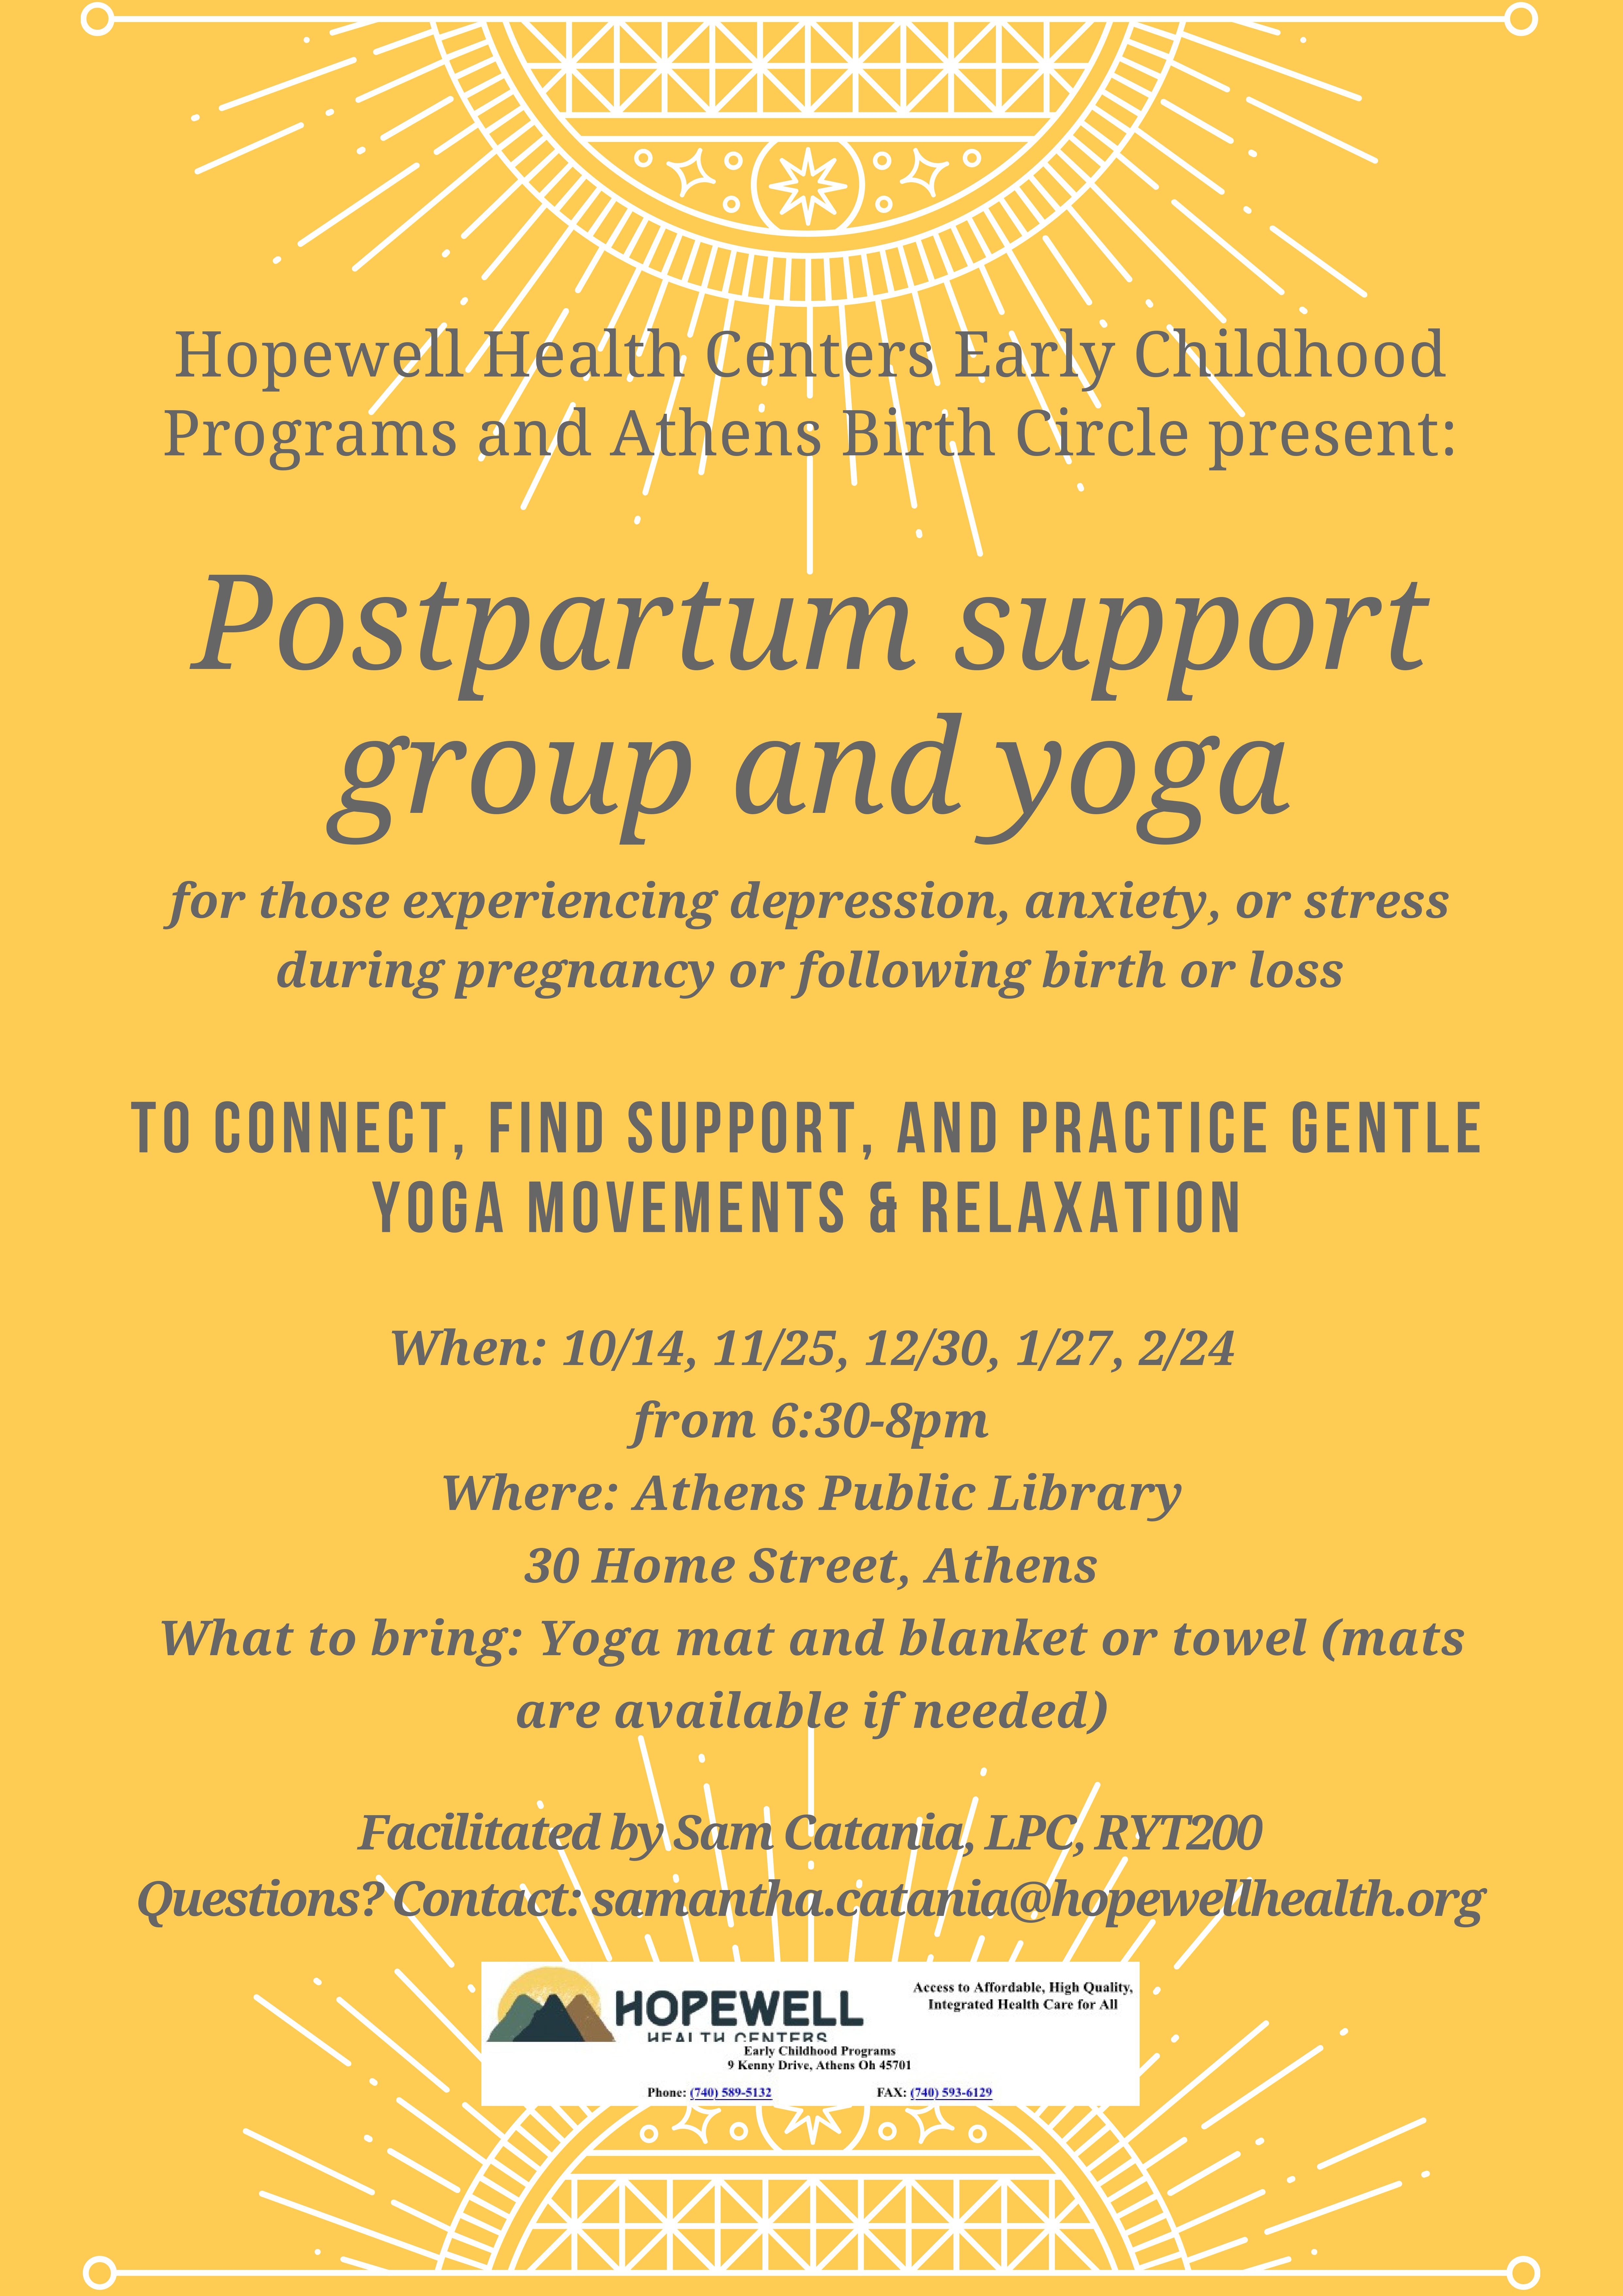 Postpartum support group and yoga flier